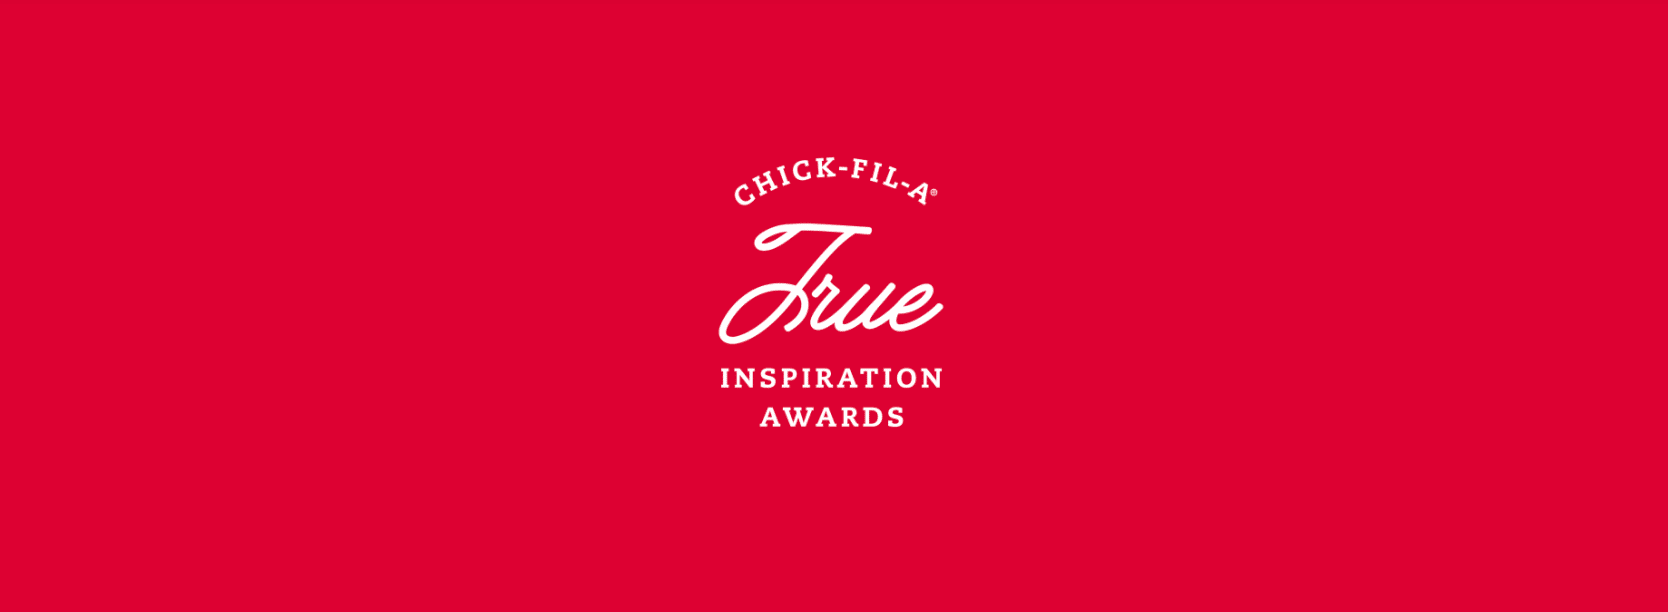 Help Community Action House Win The Chick-fil-A’s True Inspiration Awards